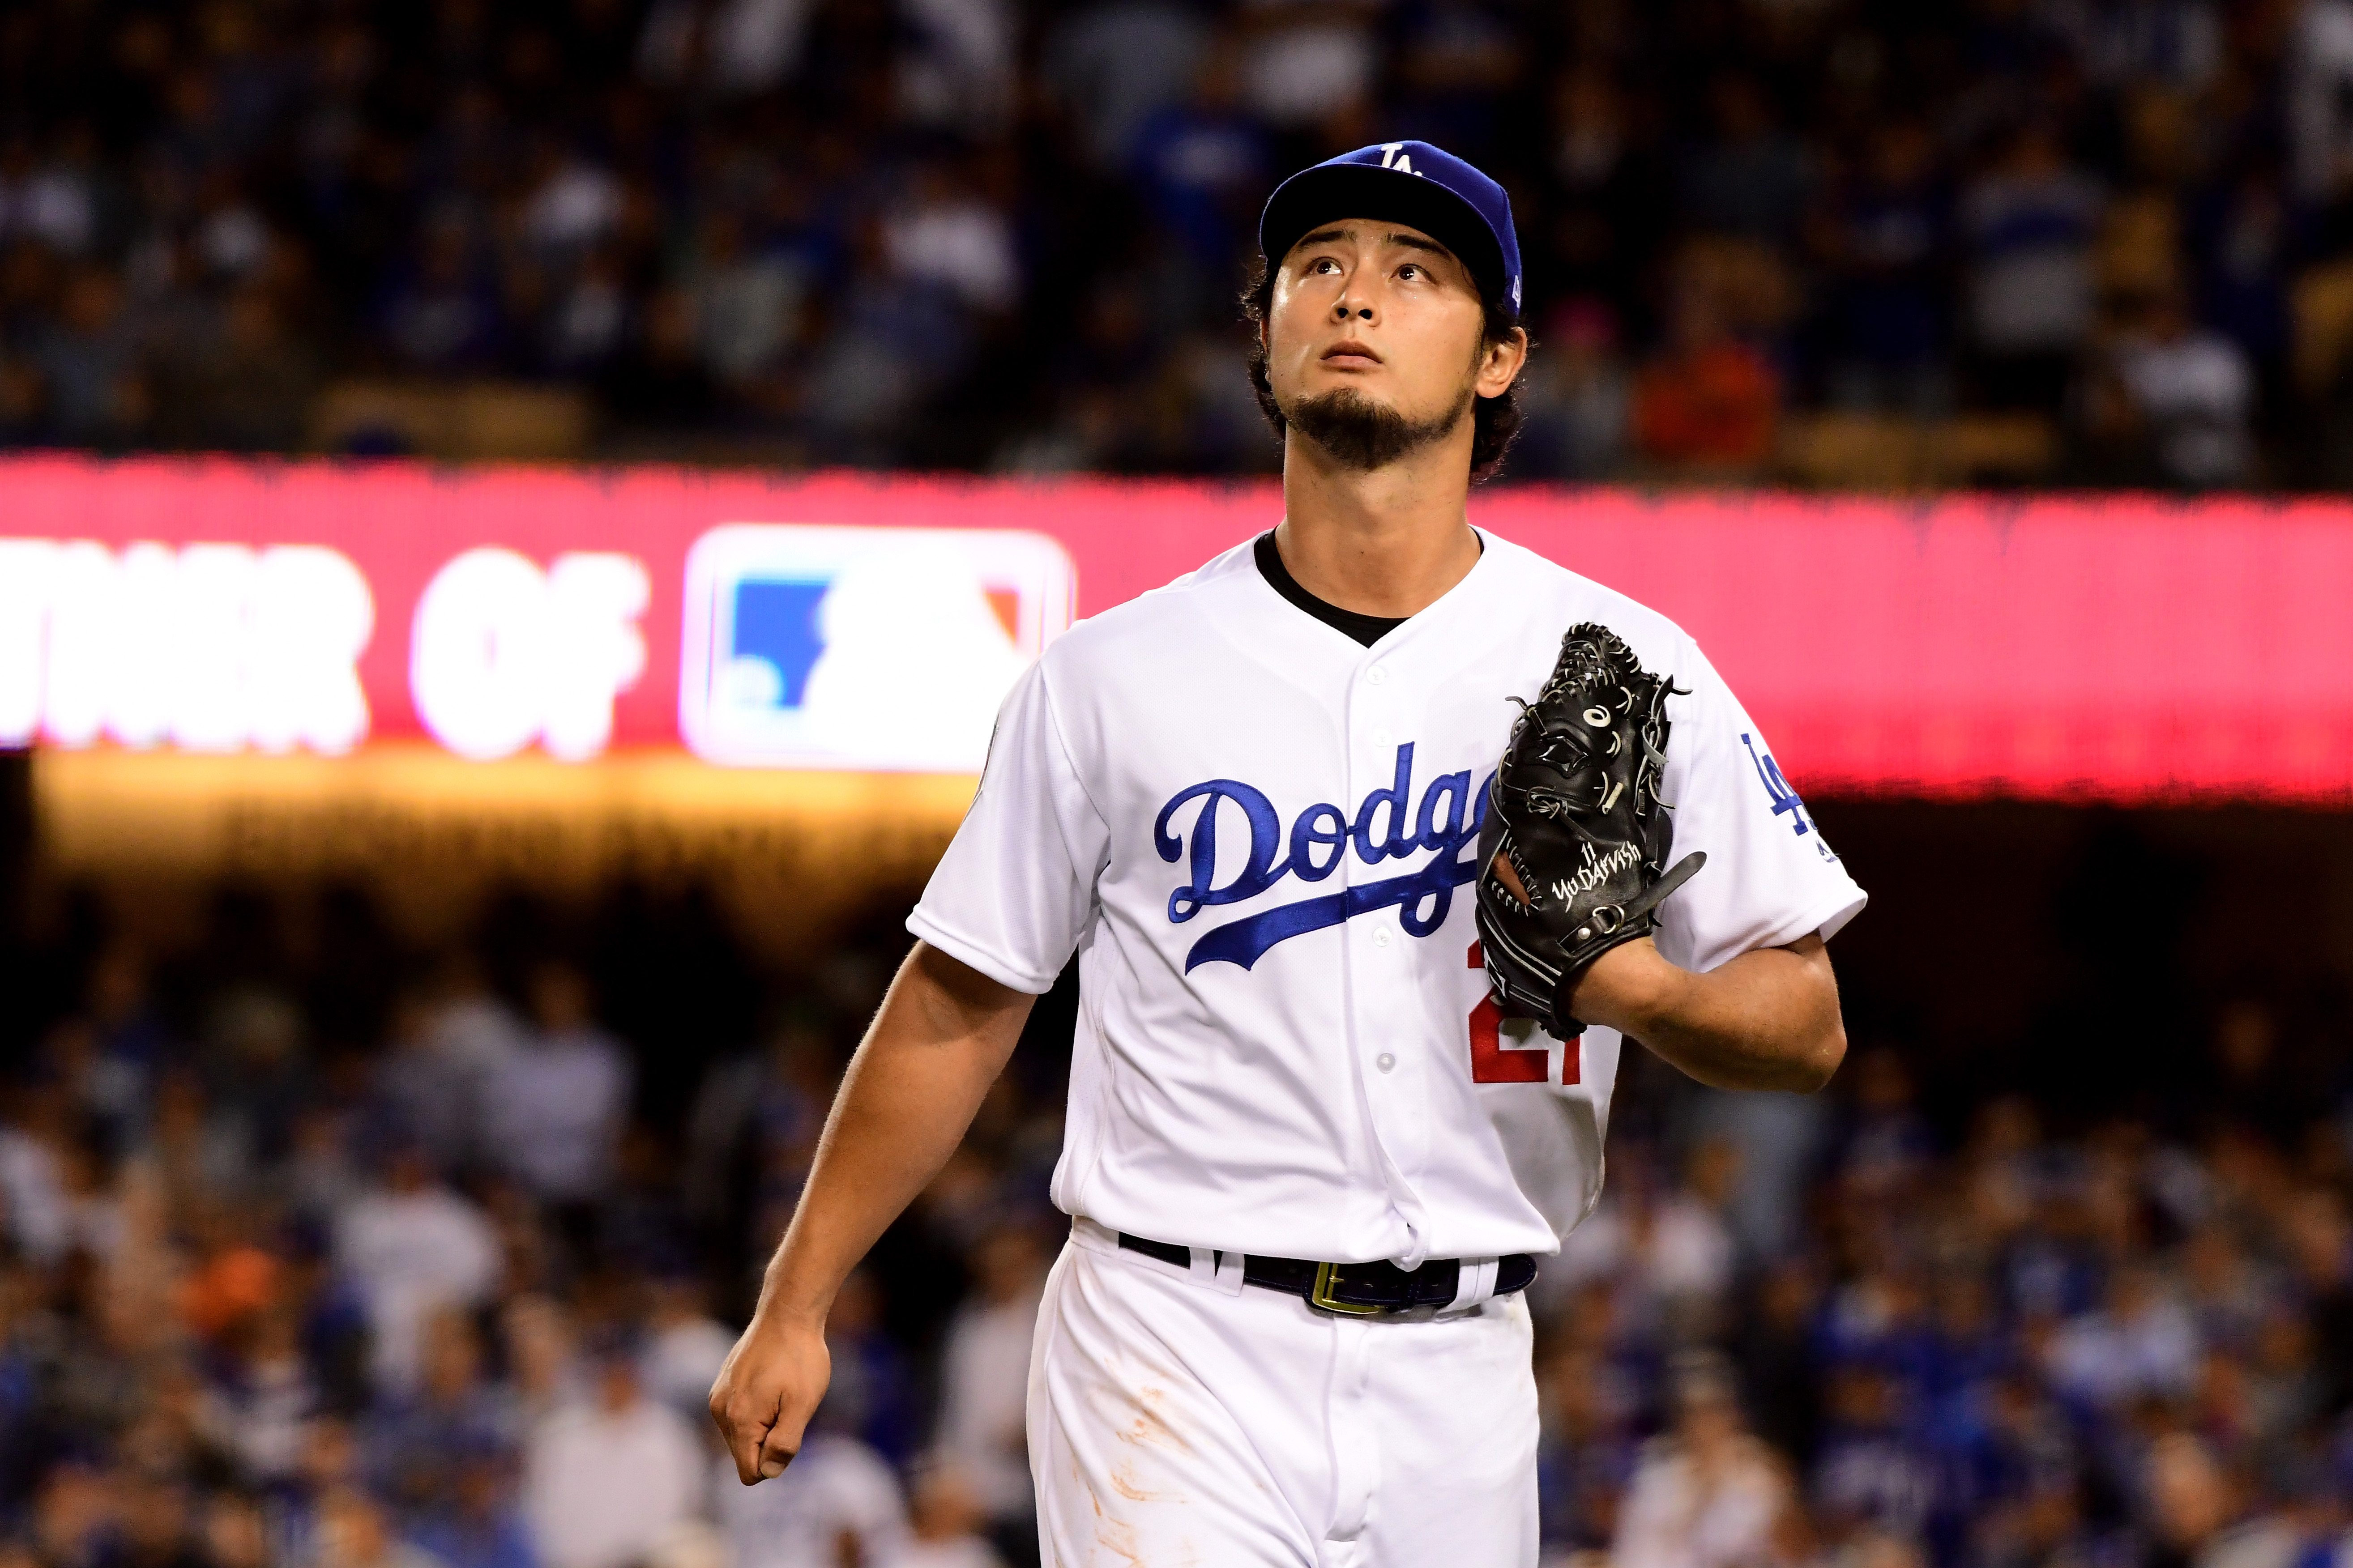 Chicago Cubs: Yu Darvish update, Texas Rangers out?